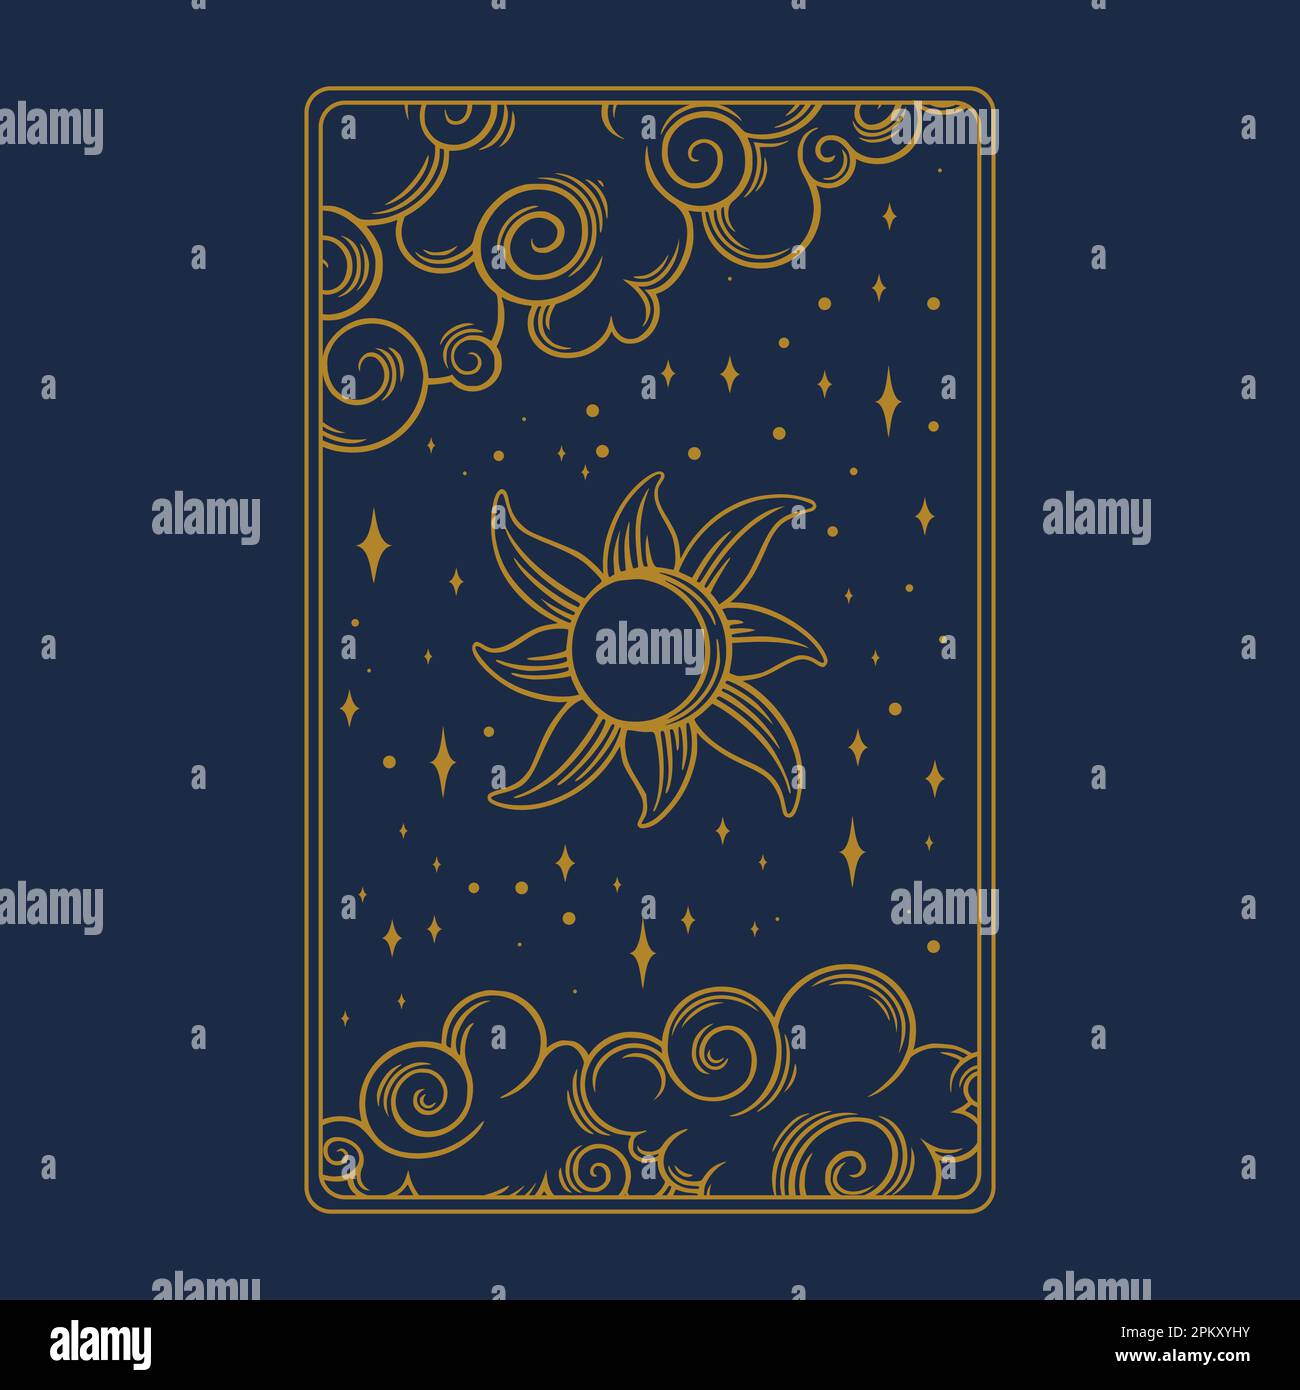 Tarot aesthetic esoteric card. Occult tarot design for oracle card covers. Vector illustration isolated in blue background Stock Vector